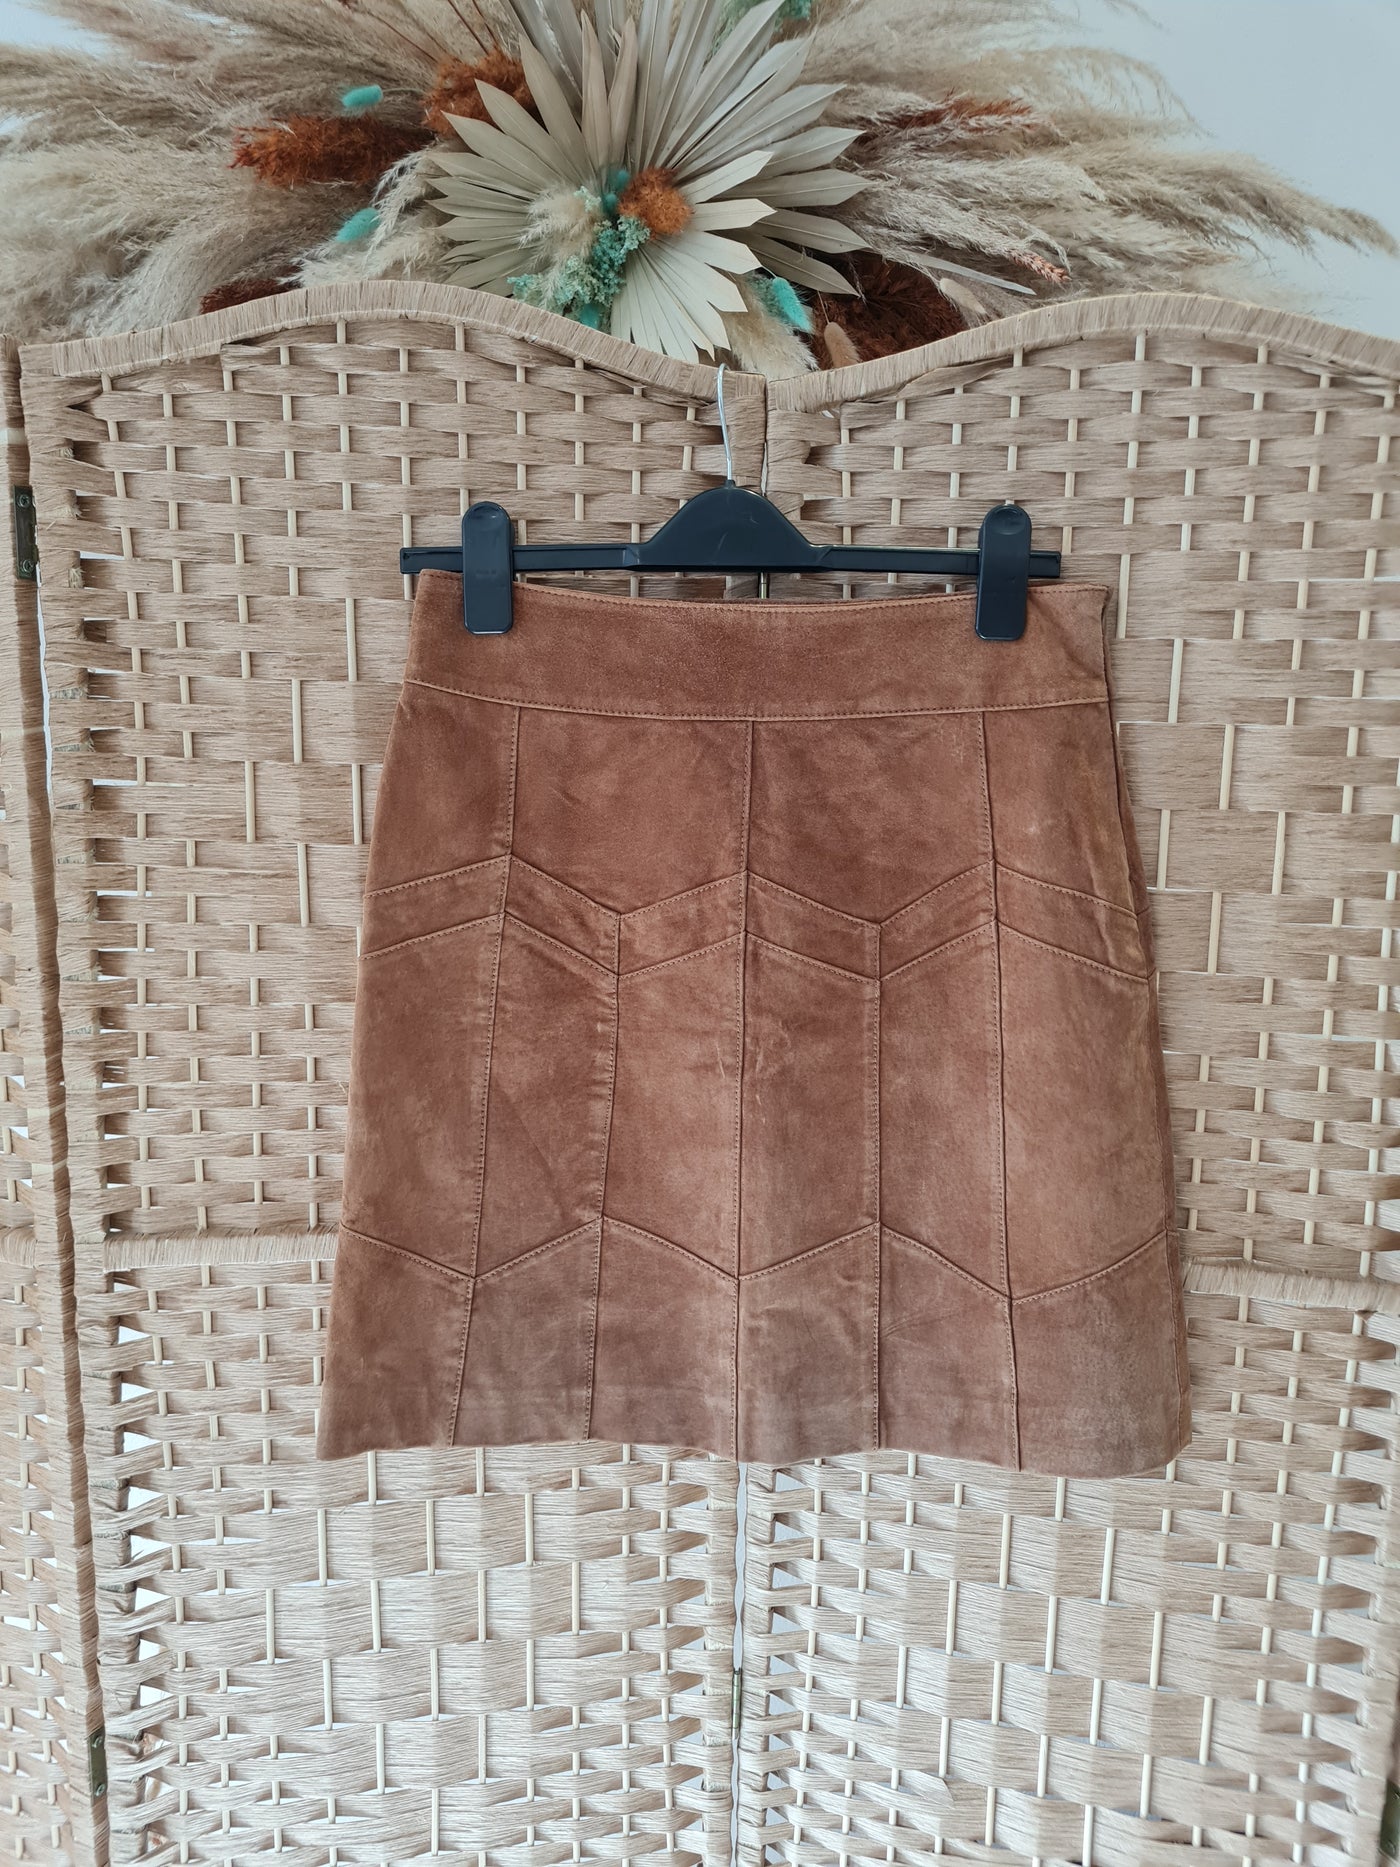 Oasis Tan Suede Skirt 10 New RRP £70